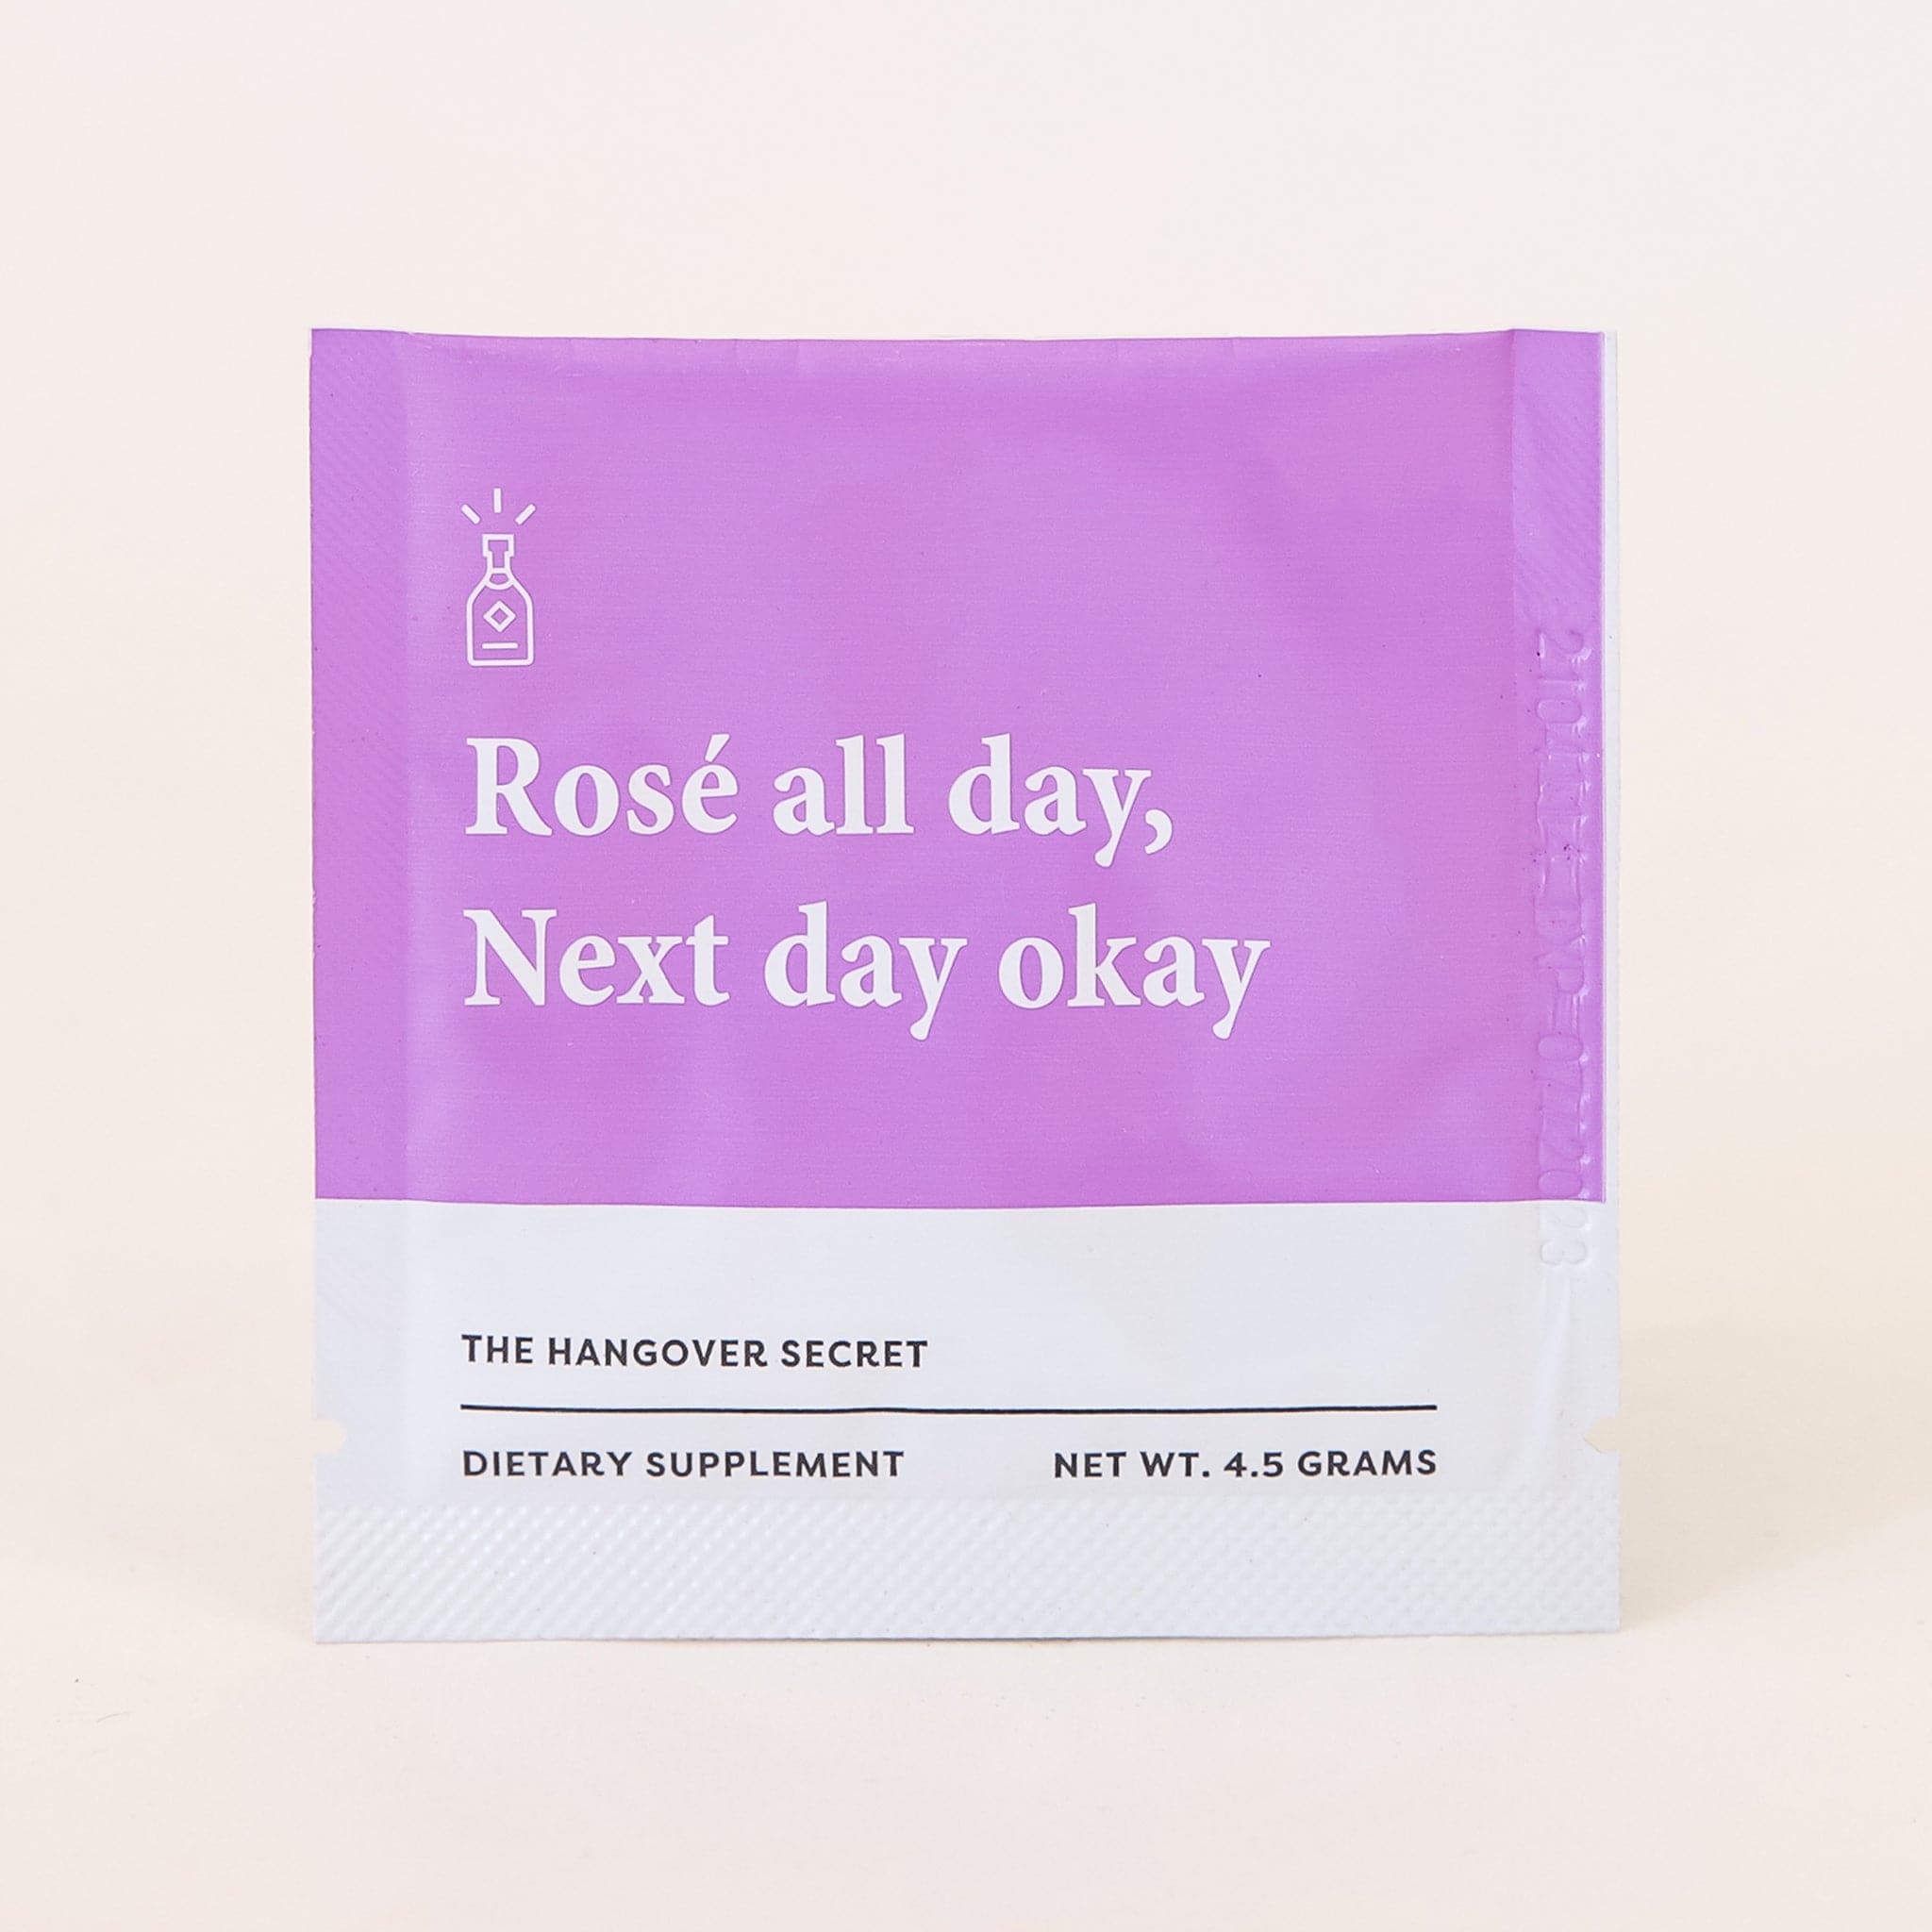 A small packet filled with a dietary supplement. The packaging&#39;s top half is a bright purple and the bottom half is white. There is text across the front that reads, &quot;Rosé all day, Next day okay&quot; as well as &quot;The Hangover Secret | Dietary Supplement&quot;.